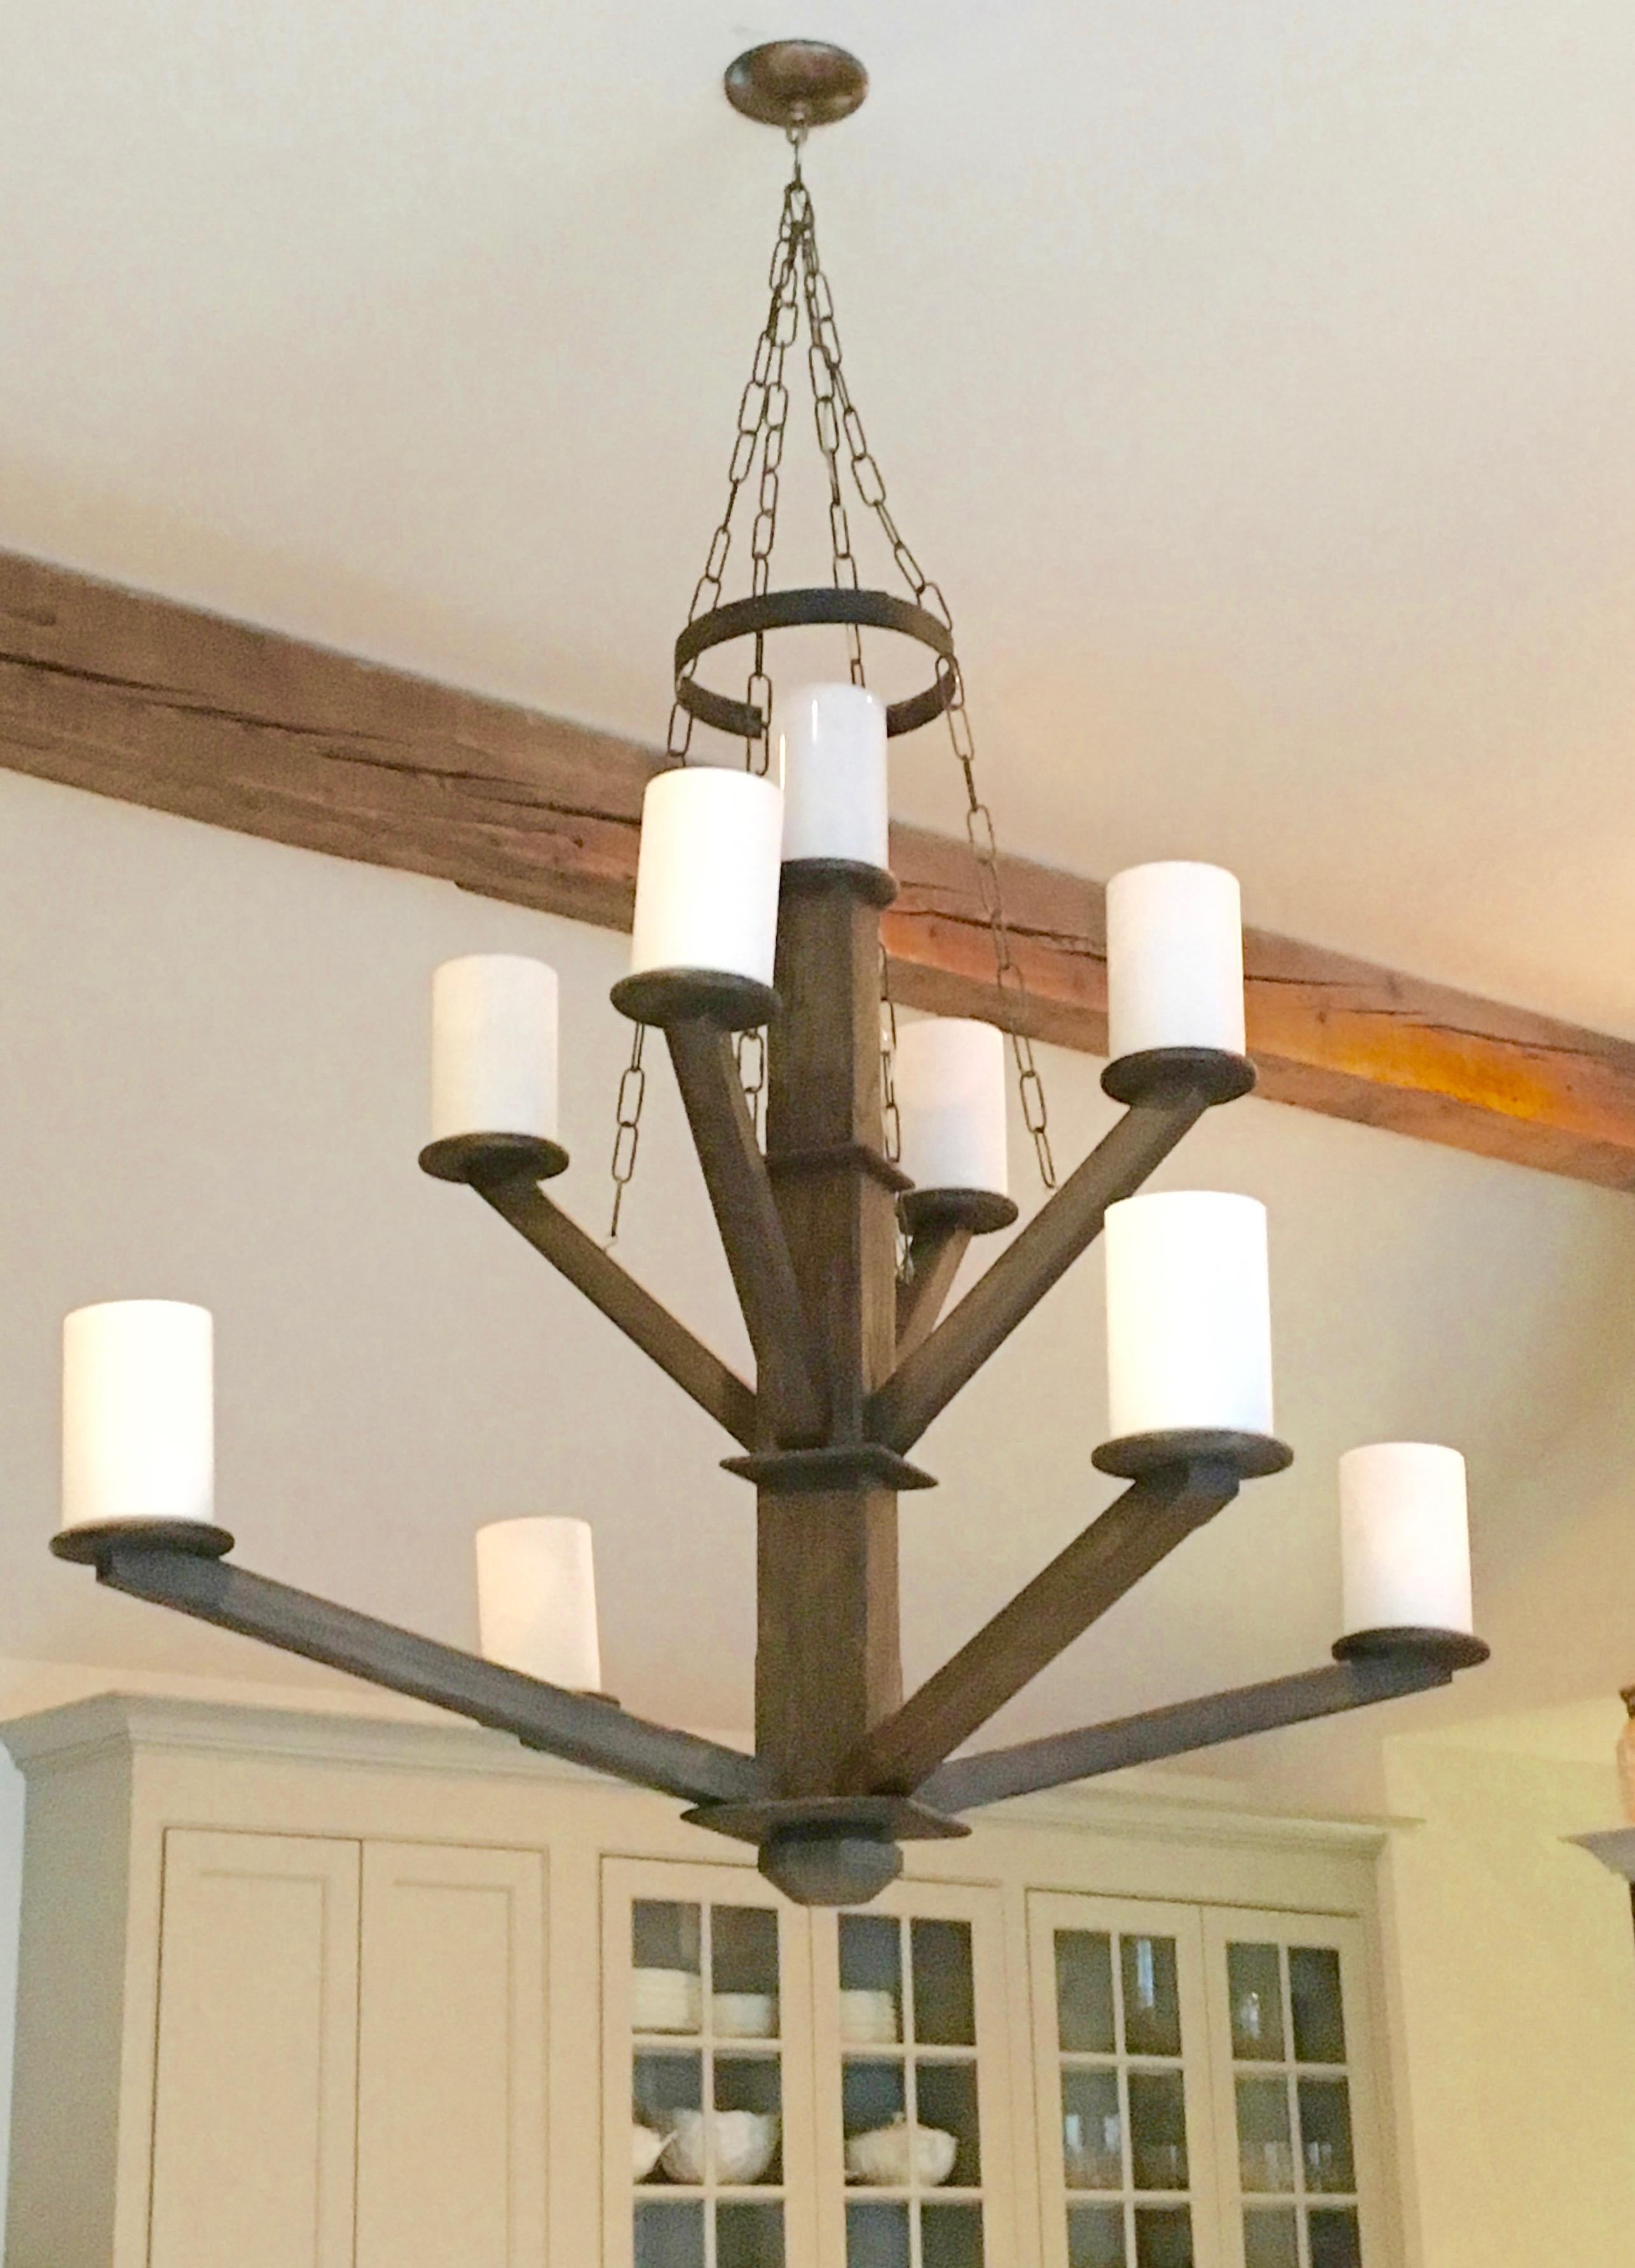 Large Avantgarden custom-made black walnut wood chandelier, with iron details and shown with milk glass cylinder shades. 
Custom woods and stain options are available.

Avantgarden has been cultivating great lighting, furniture and design in Pound